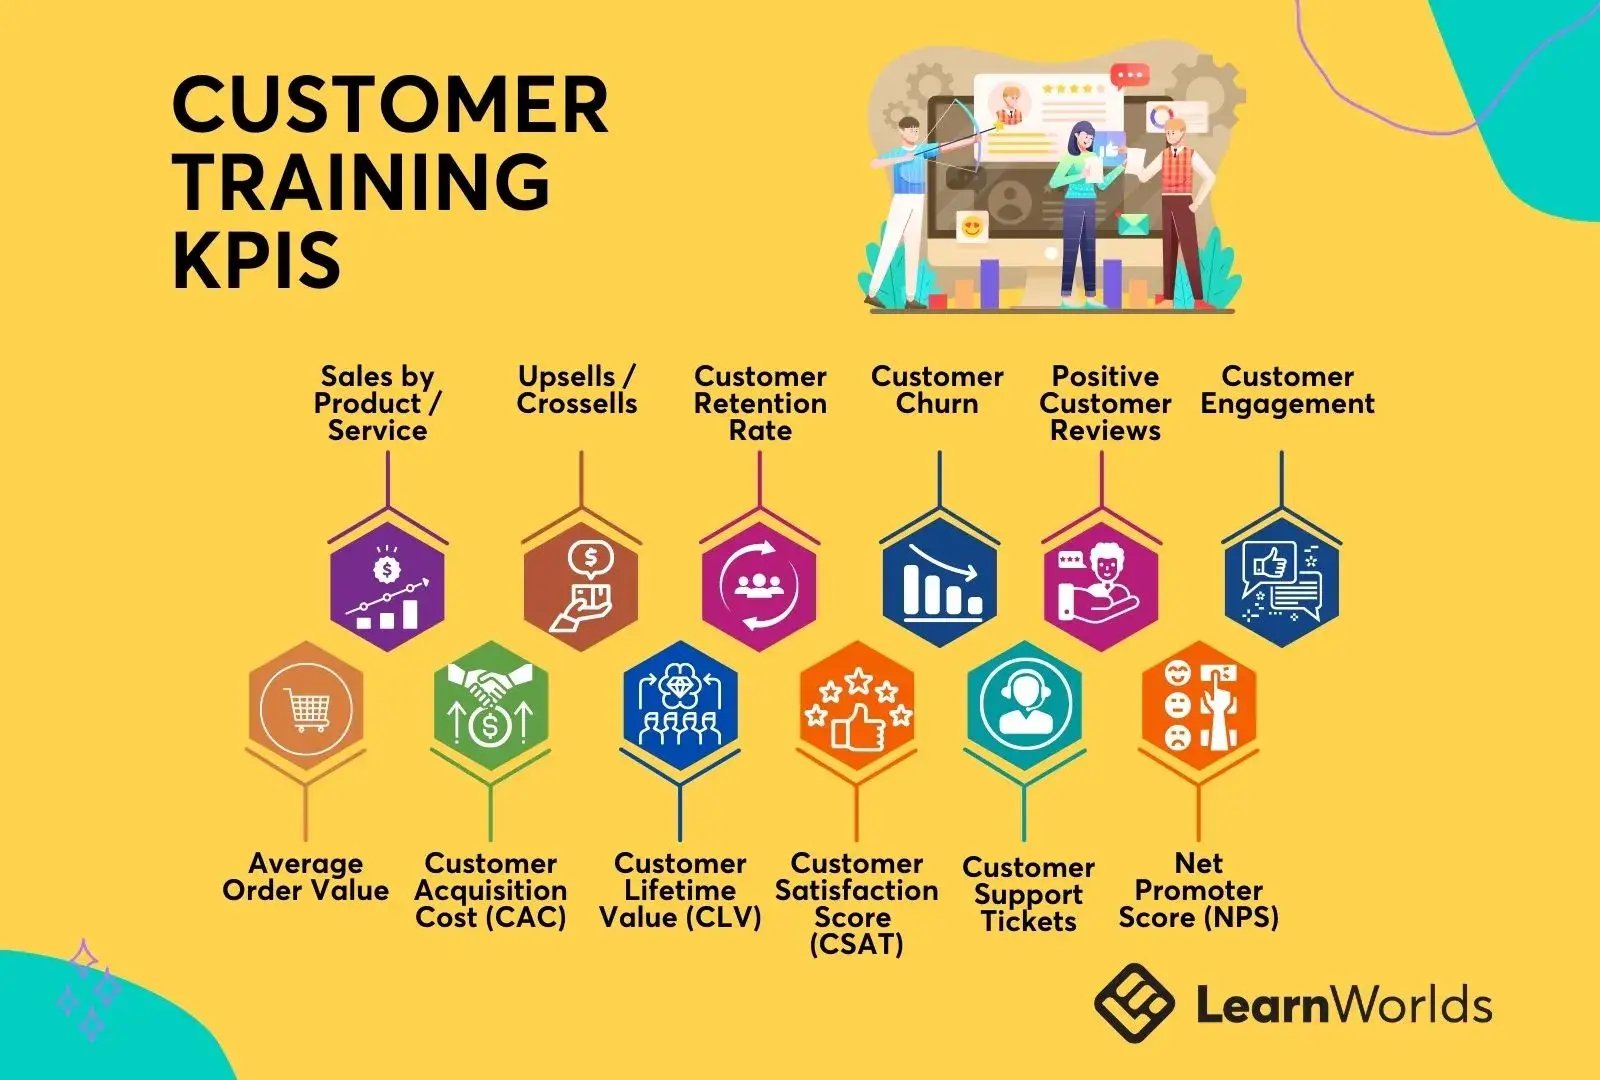 12 Customer Training KPIs visualized. How to measure success in customer training.